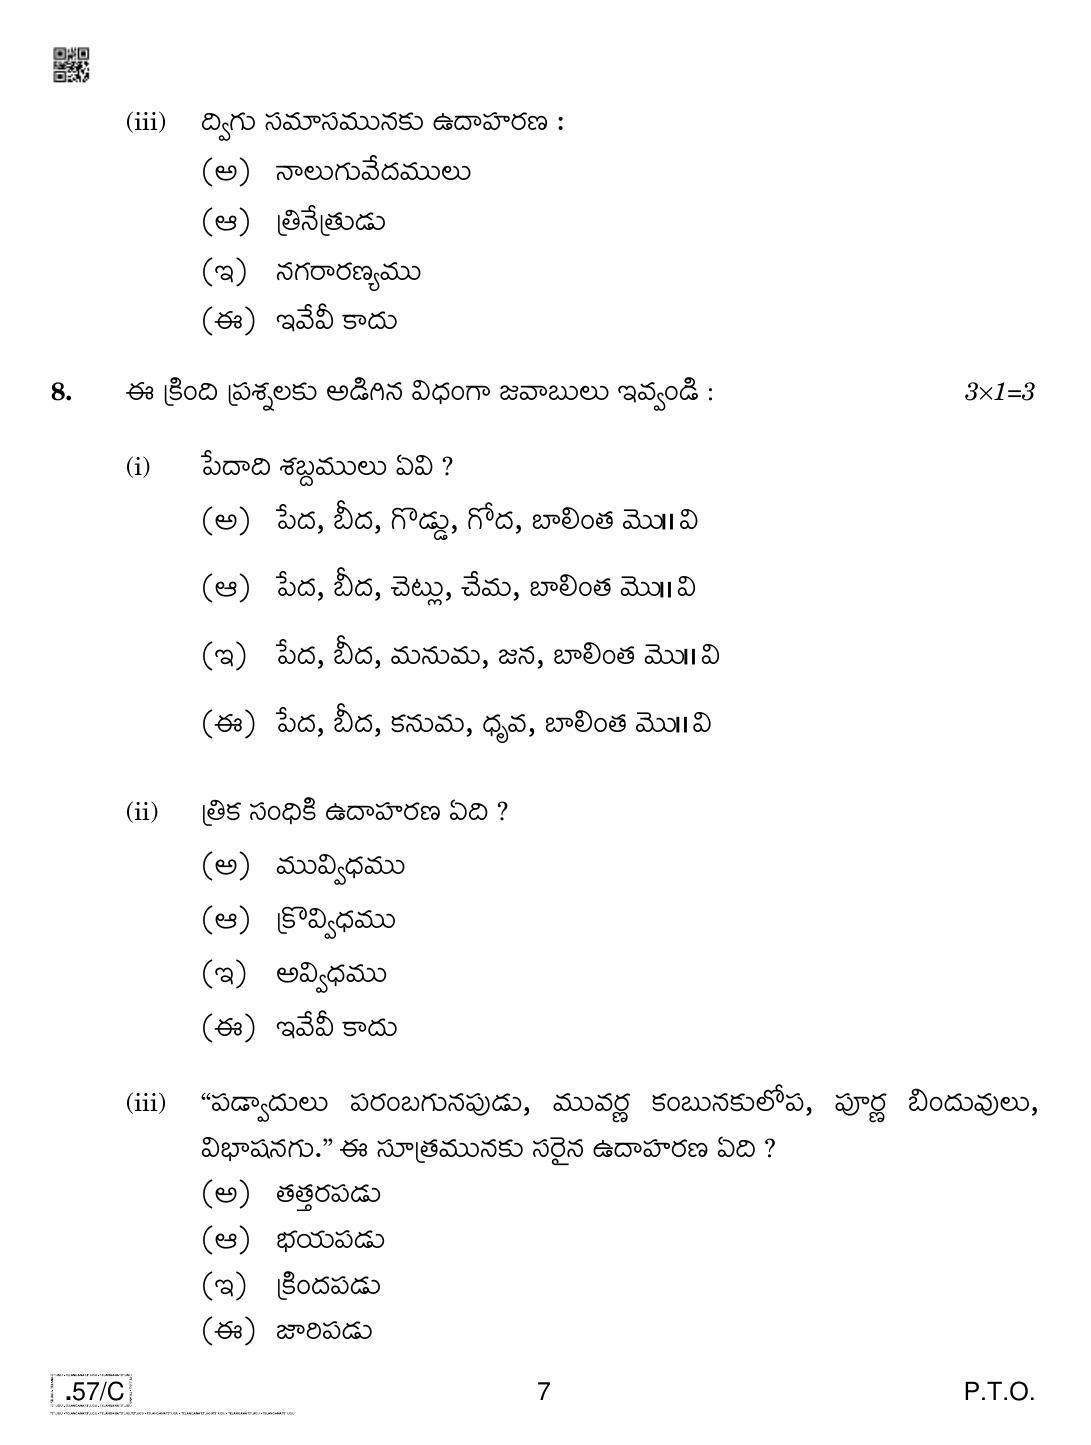 CBSE Class 10 Telug Telangana 2020 Compartment Question Paper - Page 7